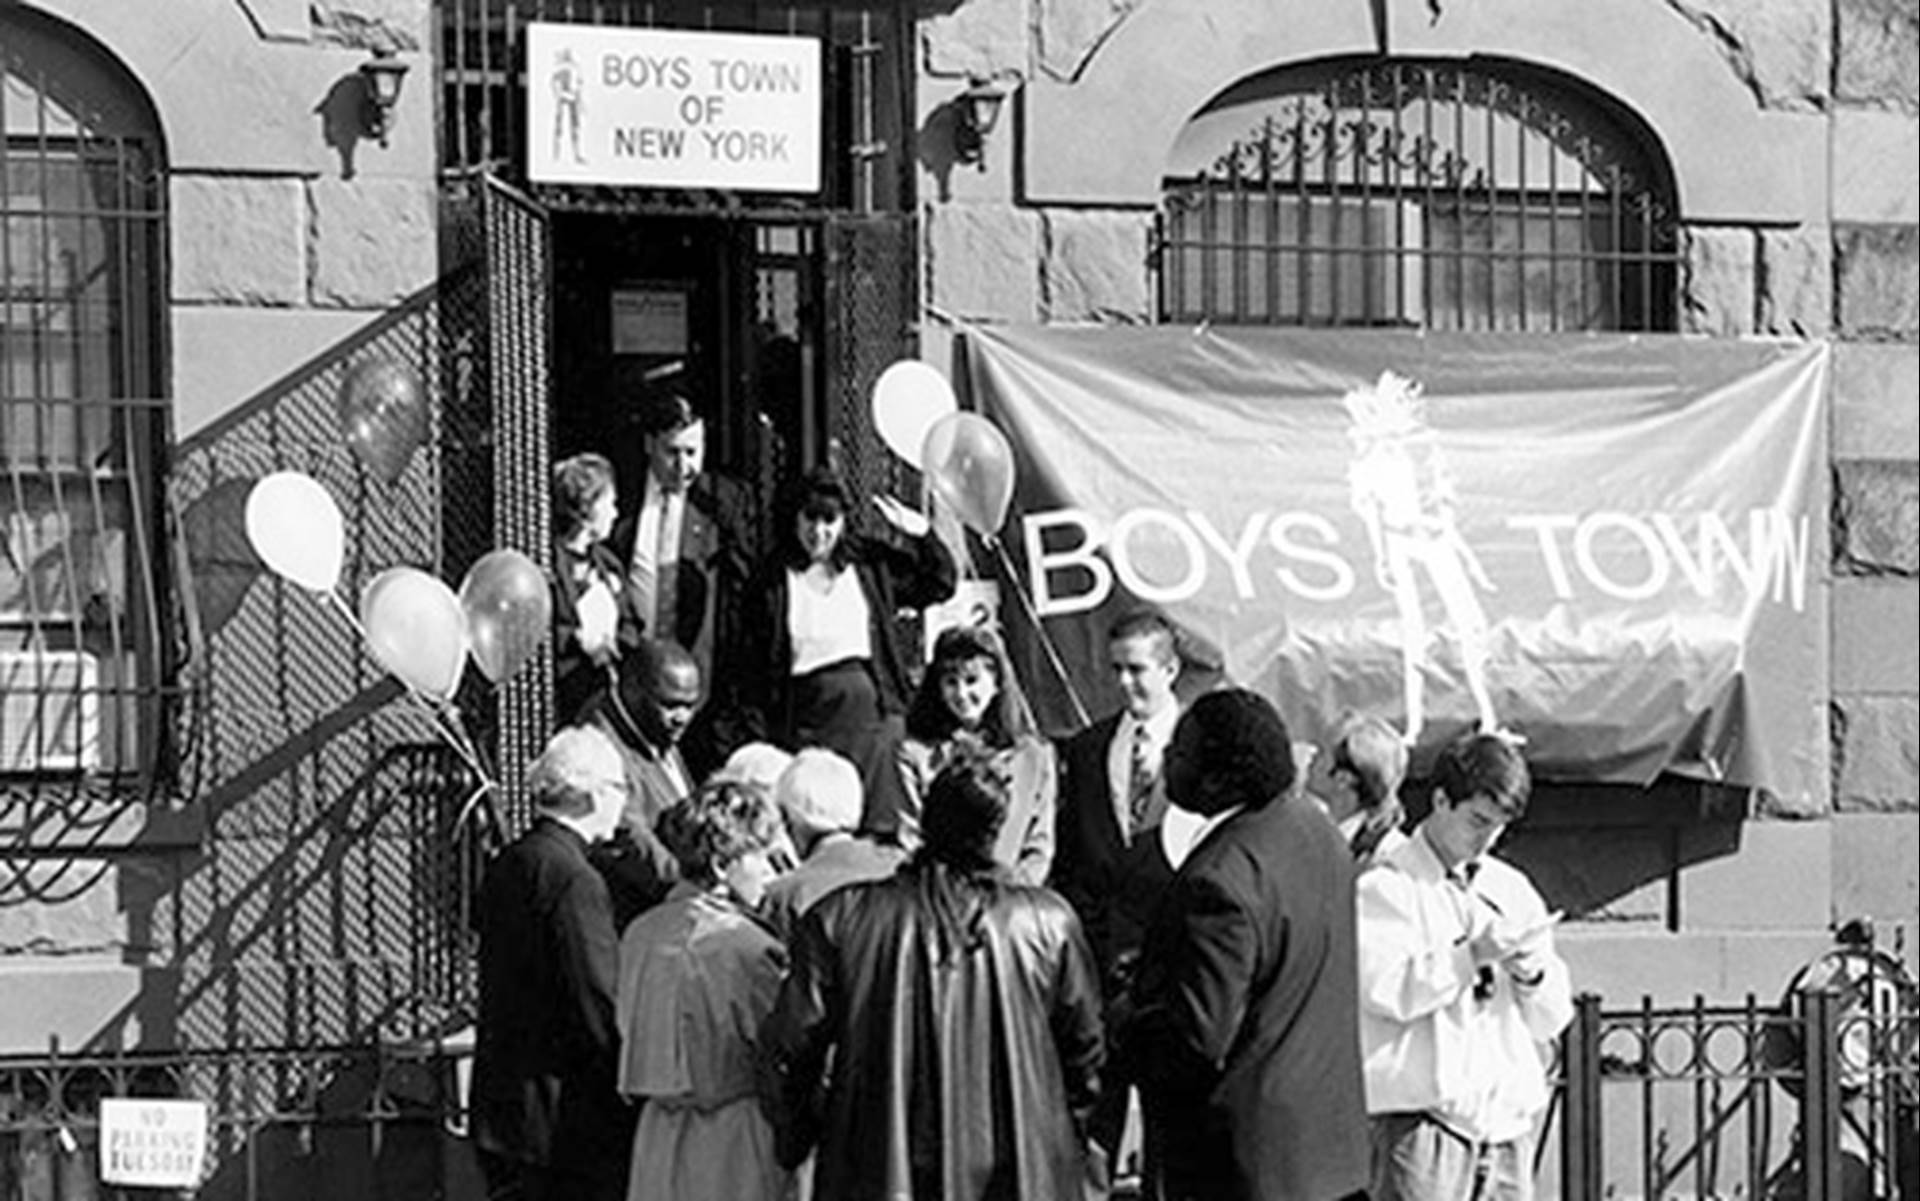 Opening of Boys Town New York